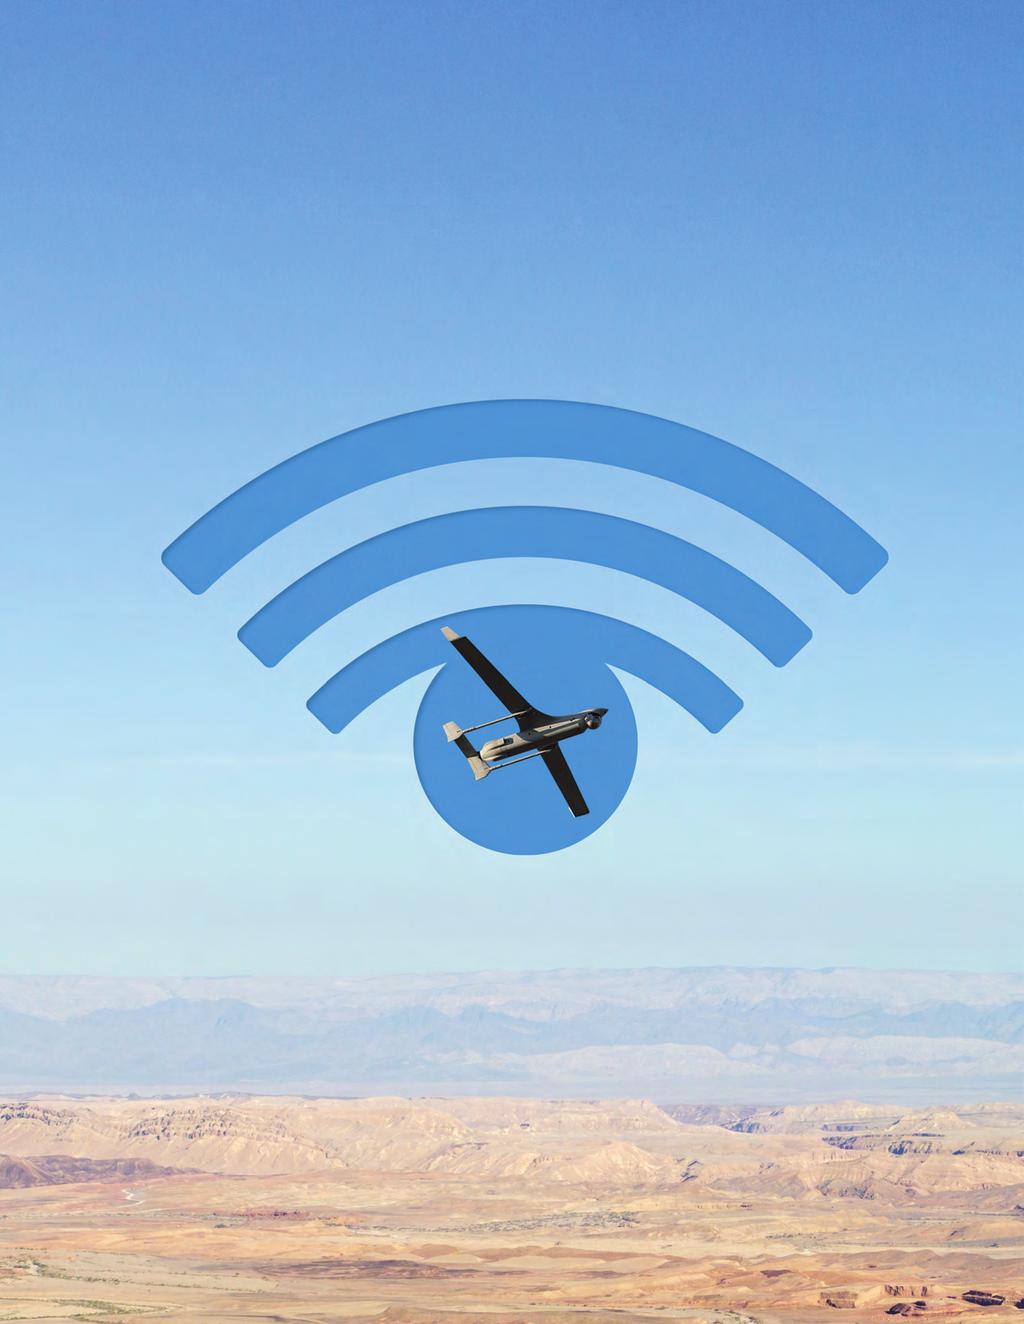 Real-time surveillance just got lighter The most important thing we build is trust AVIATOR UAV 200 Enhanced satcom connectivity